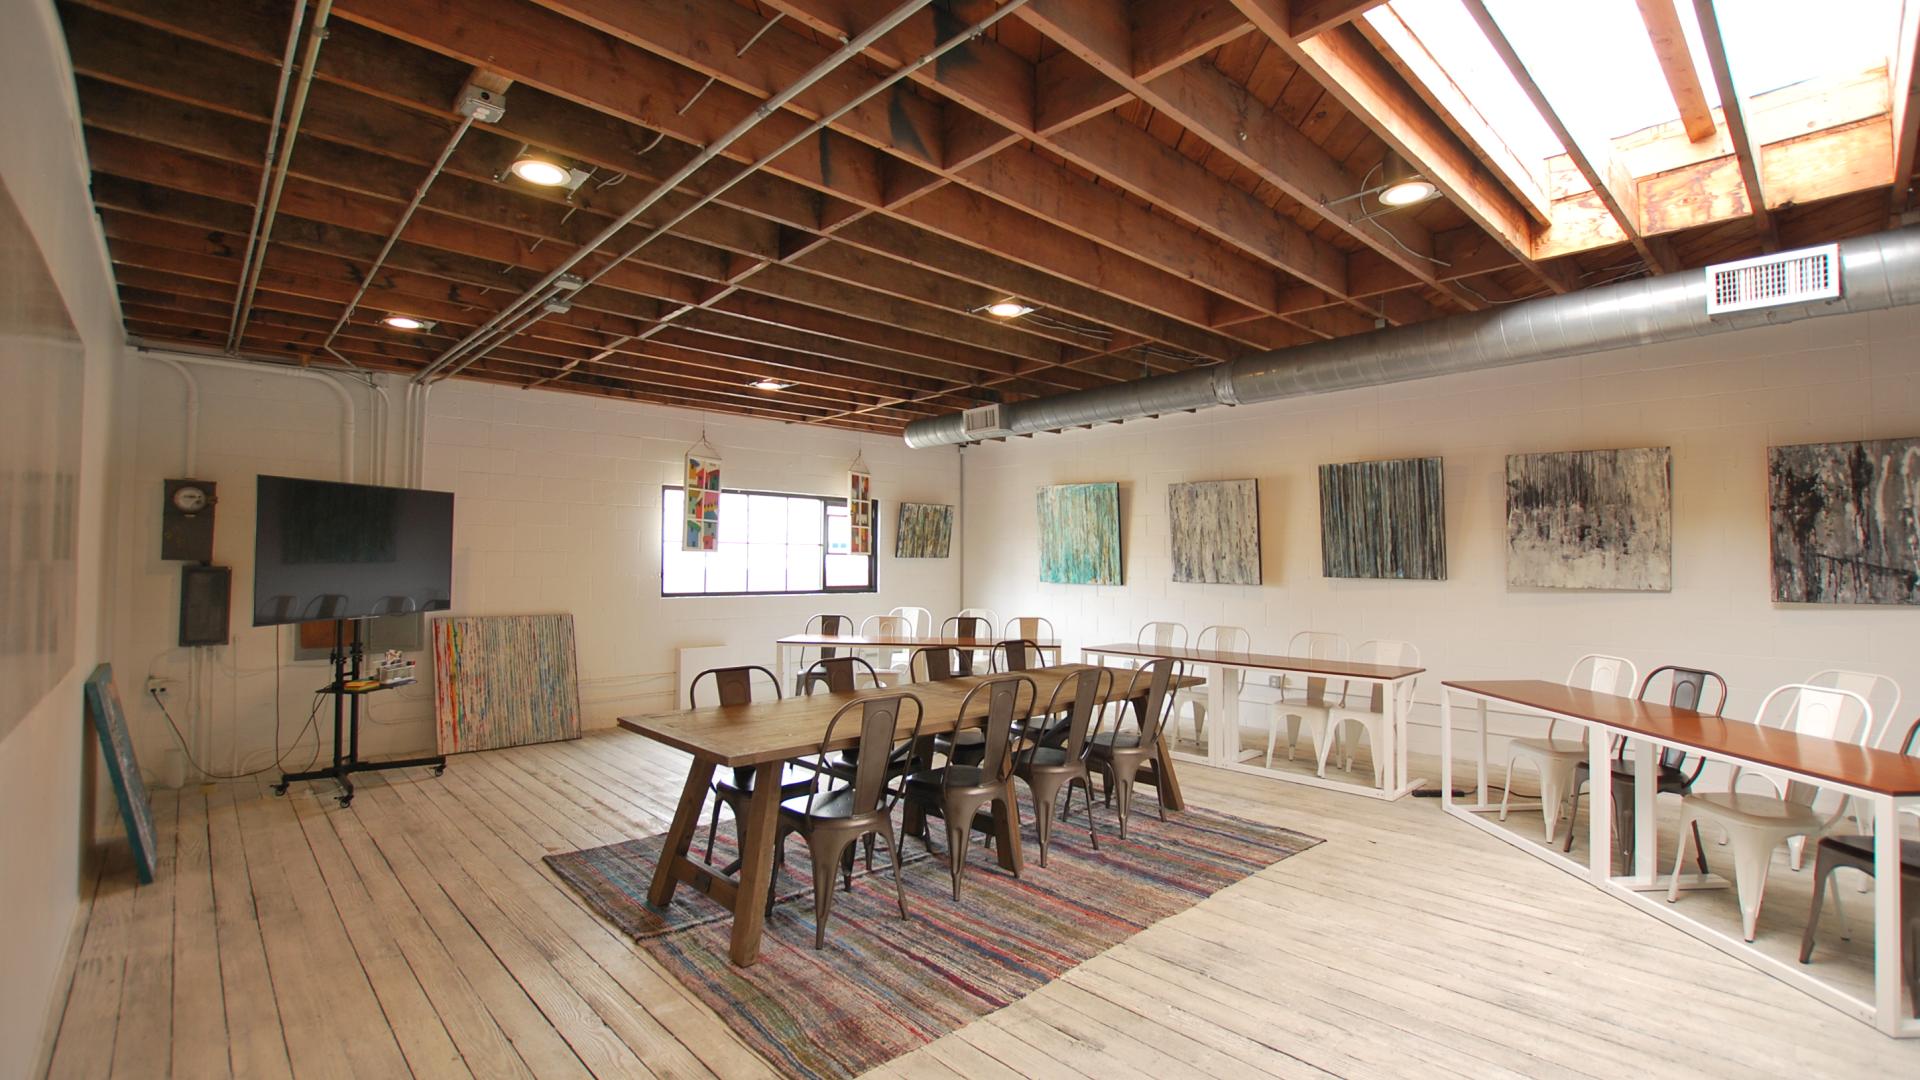 Small Meeting Rooms for Rent in Los Angeles, CA